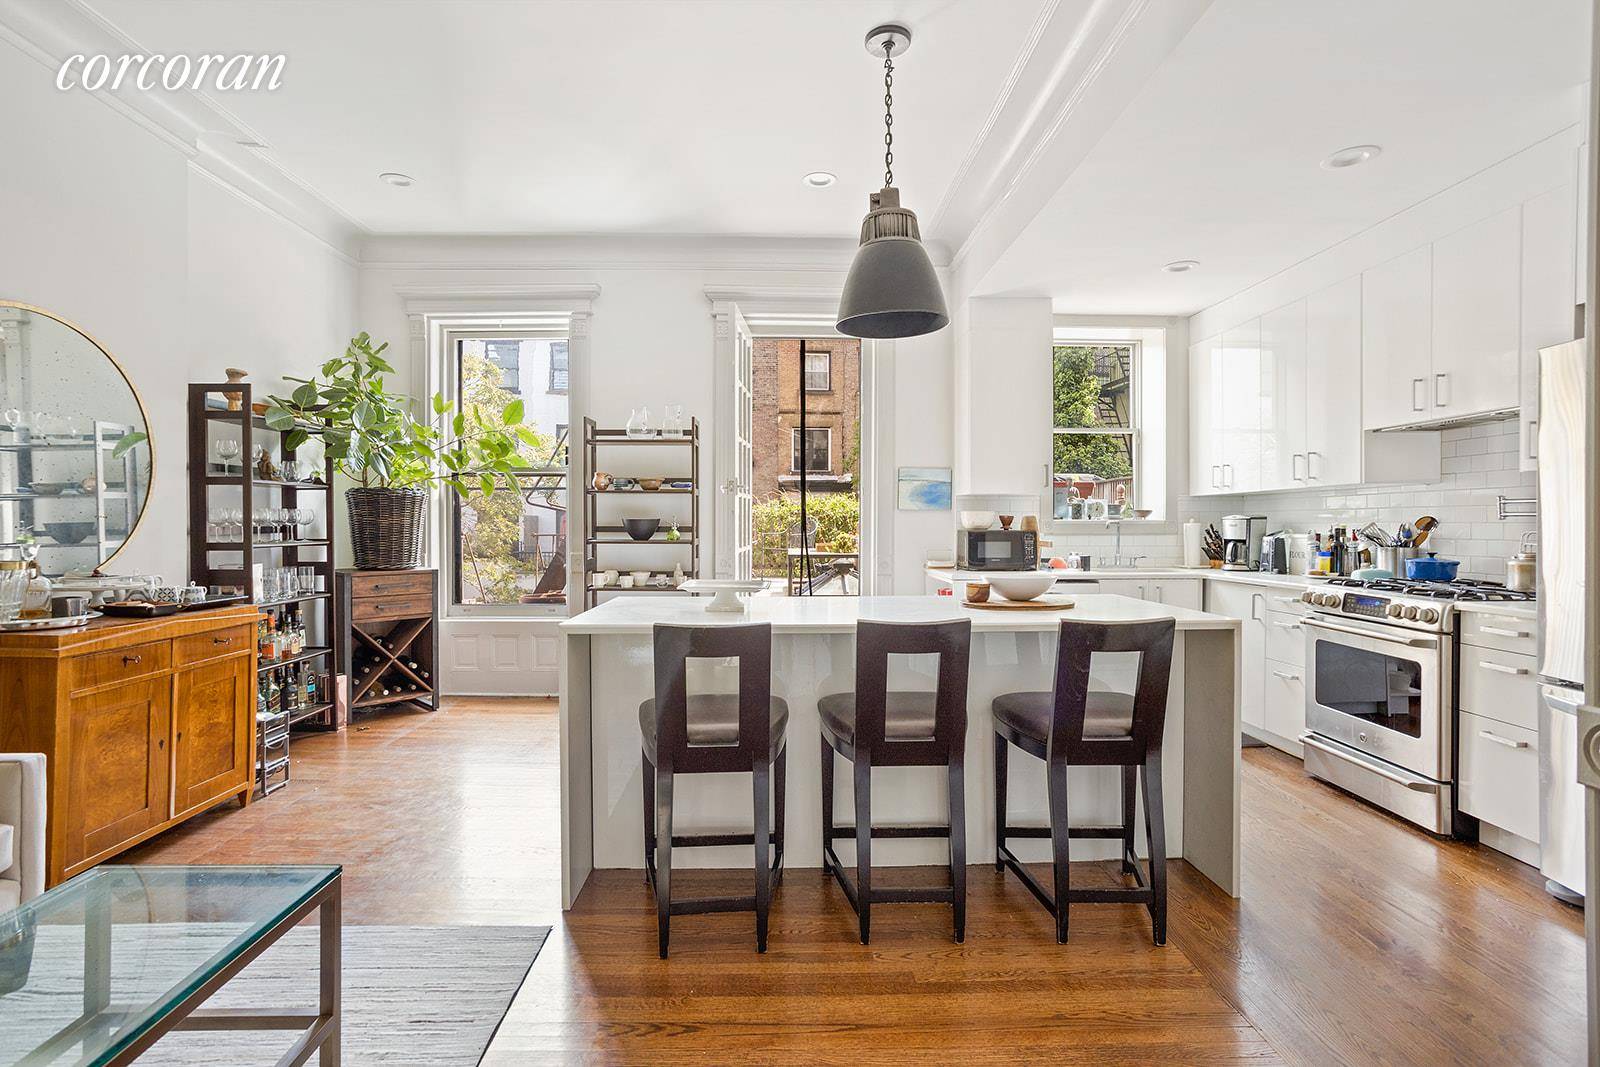 Located on one of Park Slope's most beloved blocks, this renovated 4 bedroom 2.